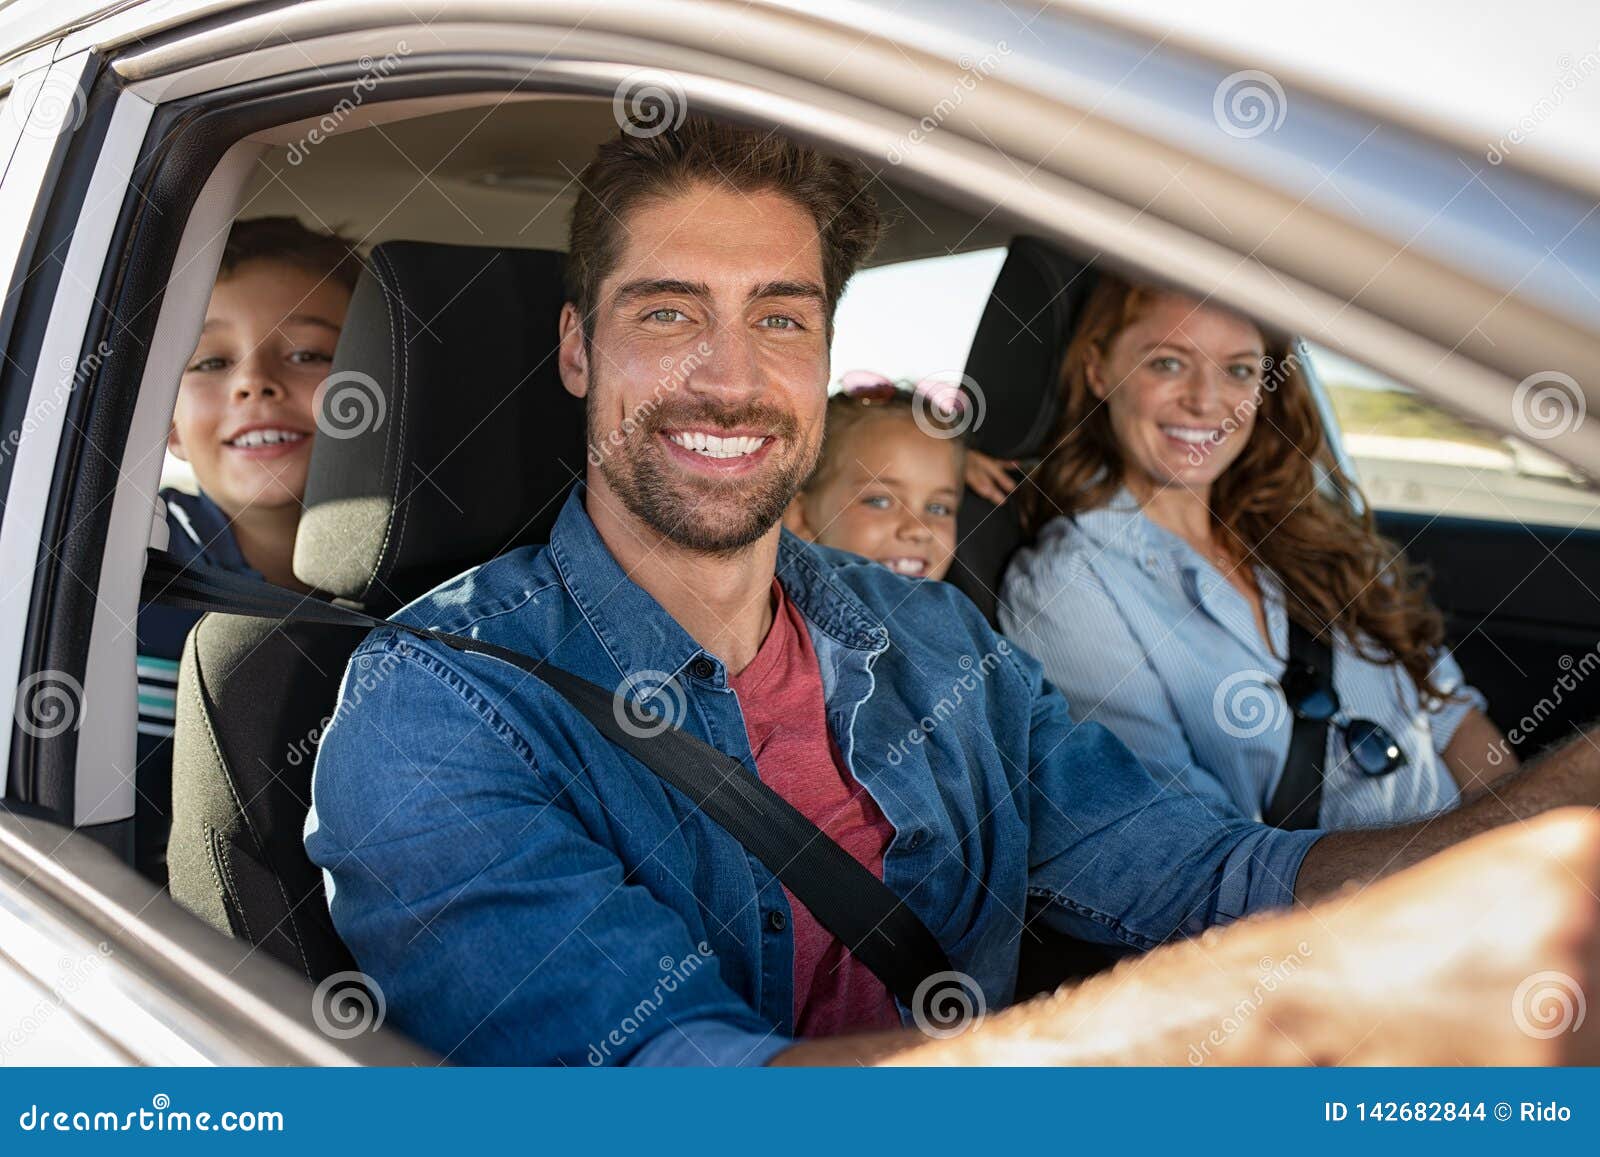 38++ Straw purchase car family ideas